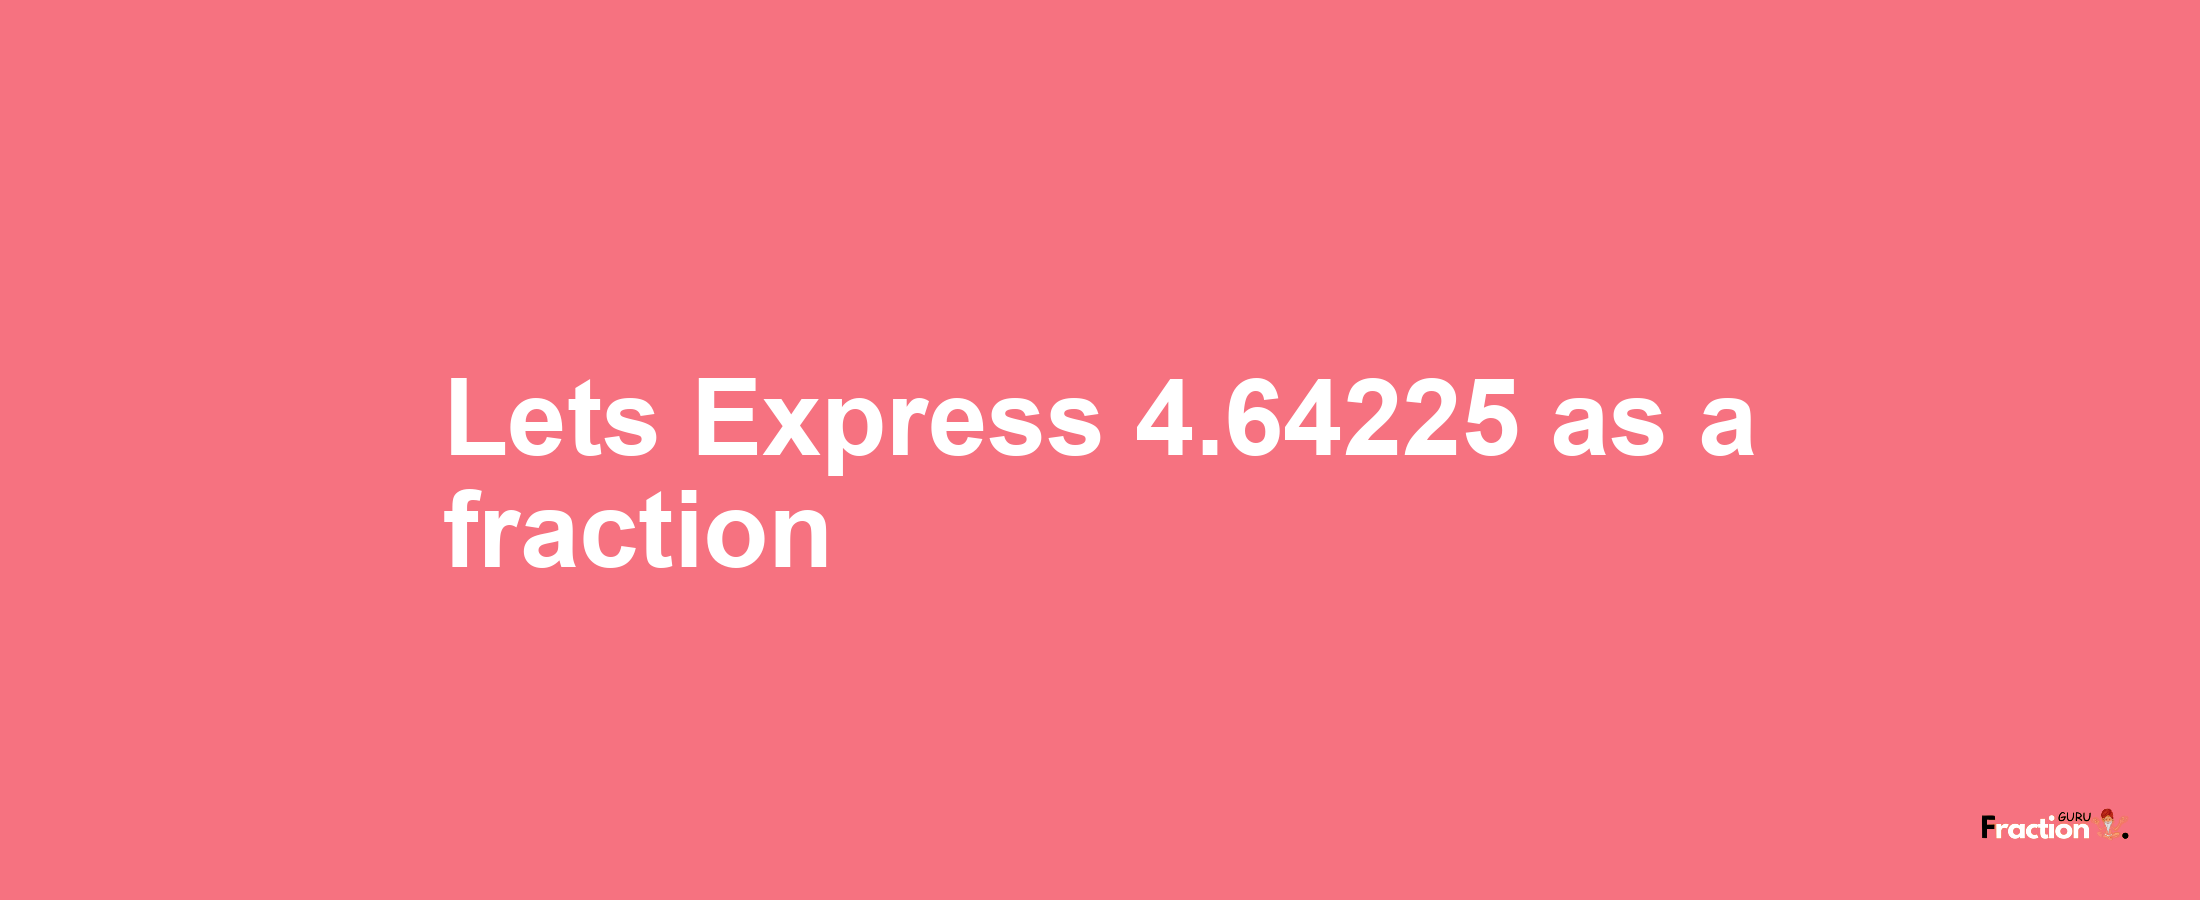 Lets Express 4.64225 as afraction